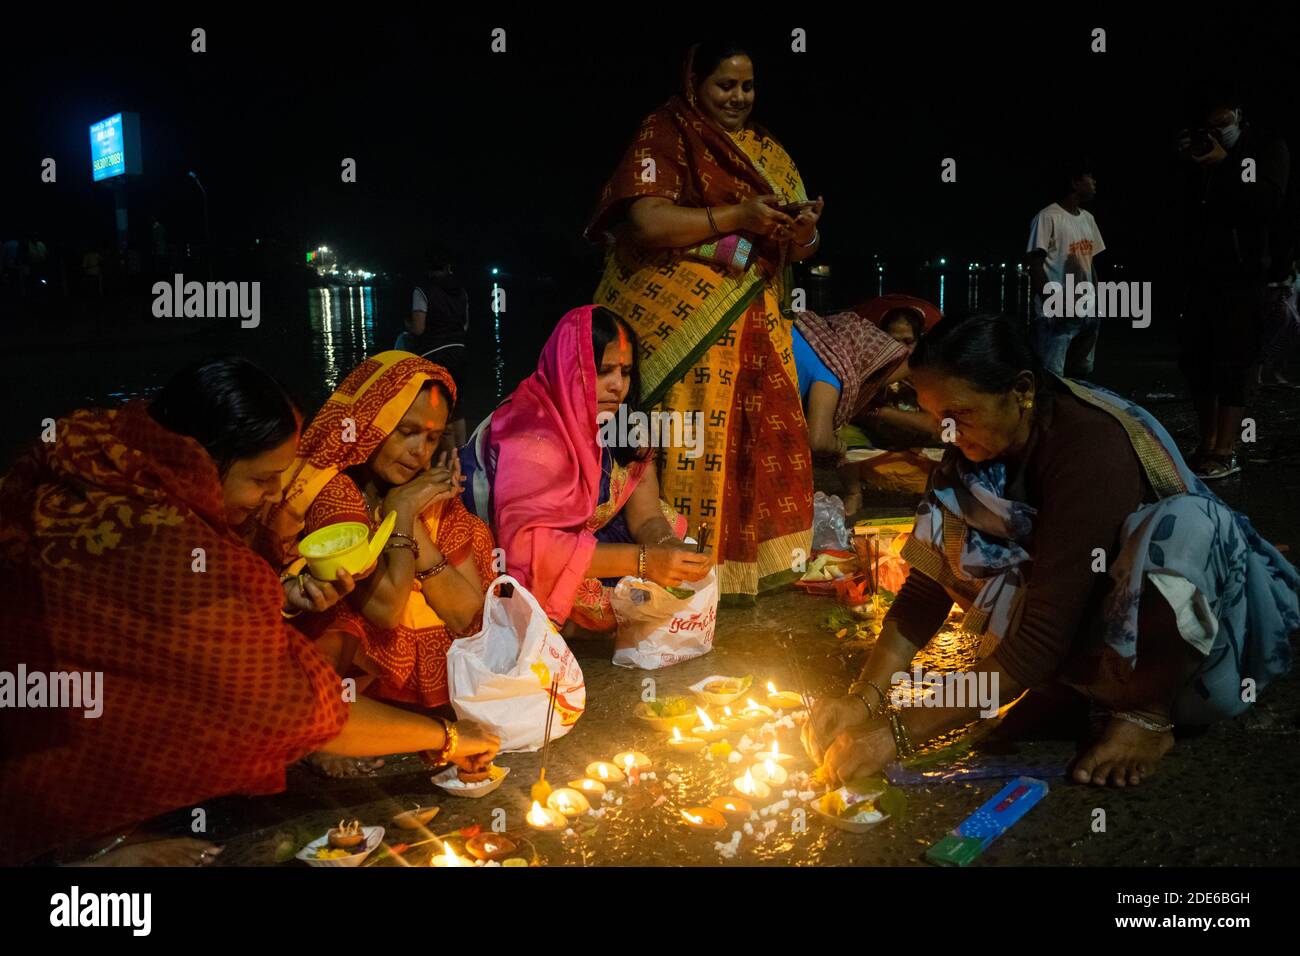 Barrackpore, West Bengal, India. 29th Nov, 2020. Women are lightening up earthen lamps for the rituals of Dev Deepawali at the bank of the holy river Ganga. Because of COVID19 pandemic situation, very few people have come to celebrate this festival at the bank of river Ganga this year because the government has banned all kinds of gatherings. Credit: Santarpan Roy/ZUMA Wire/Alamy Live News Stock Photo